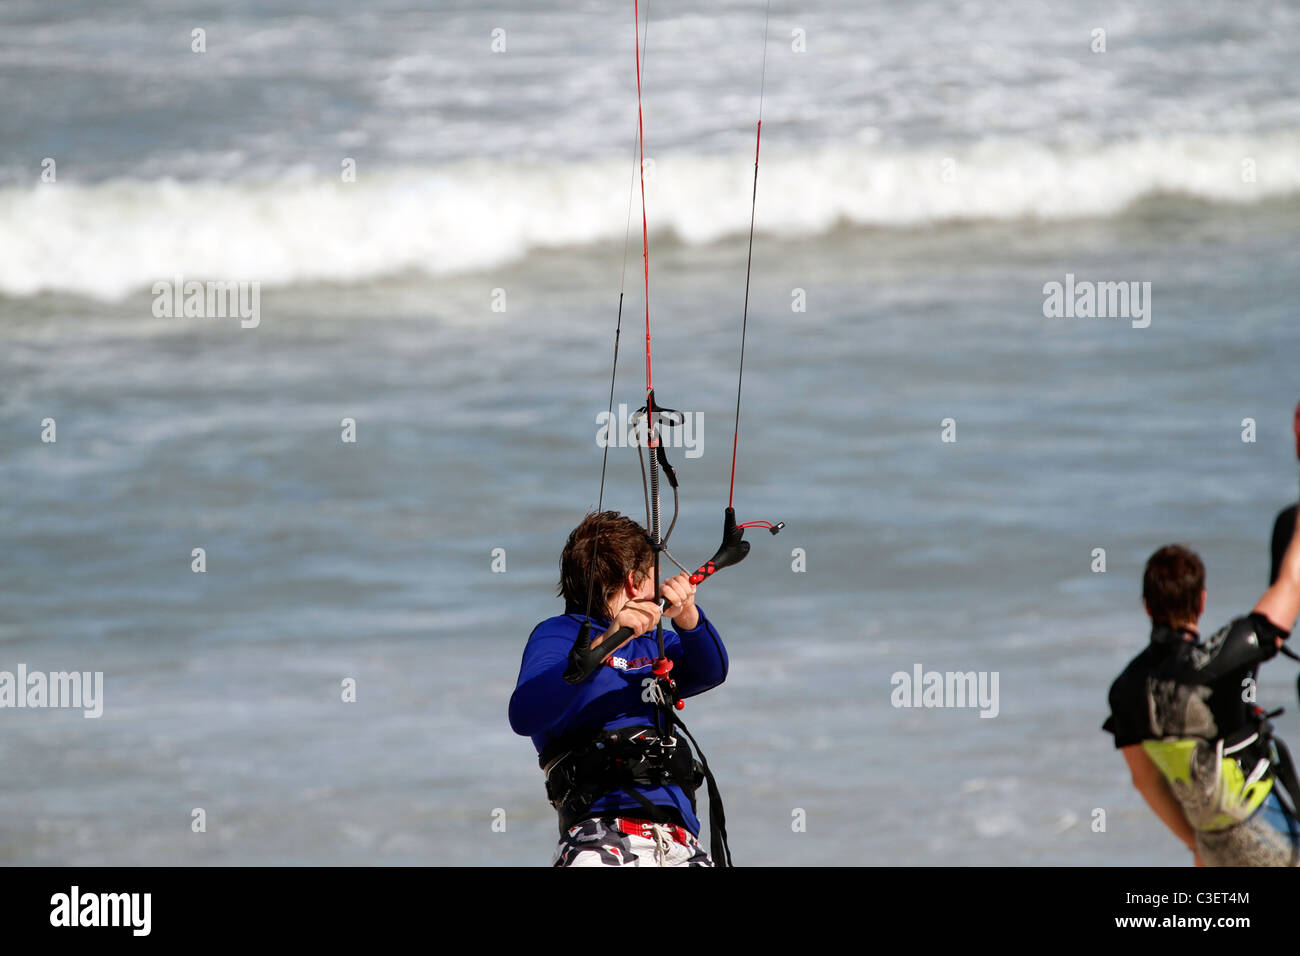 Kite surfer at Blouberg Beachfront , Cape Town, South Africa. Stock Photo